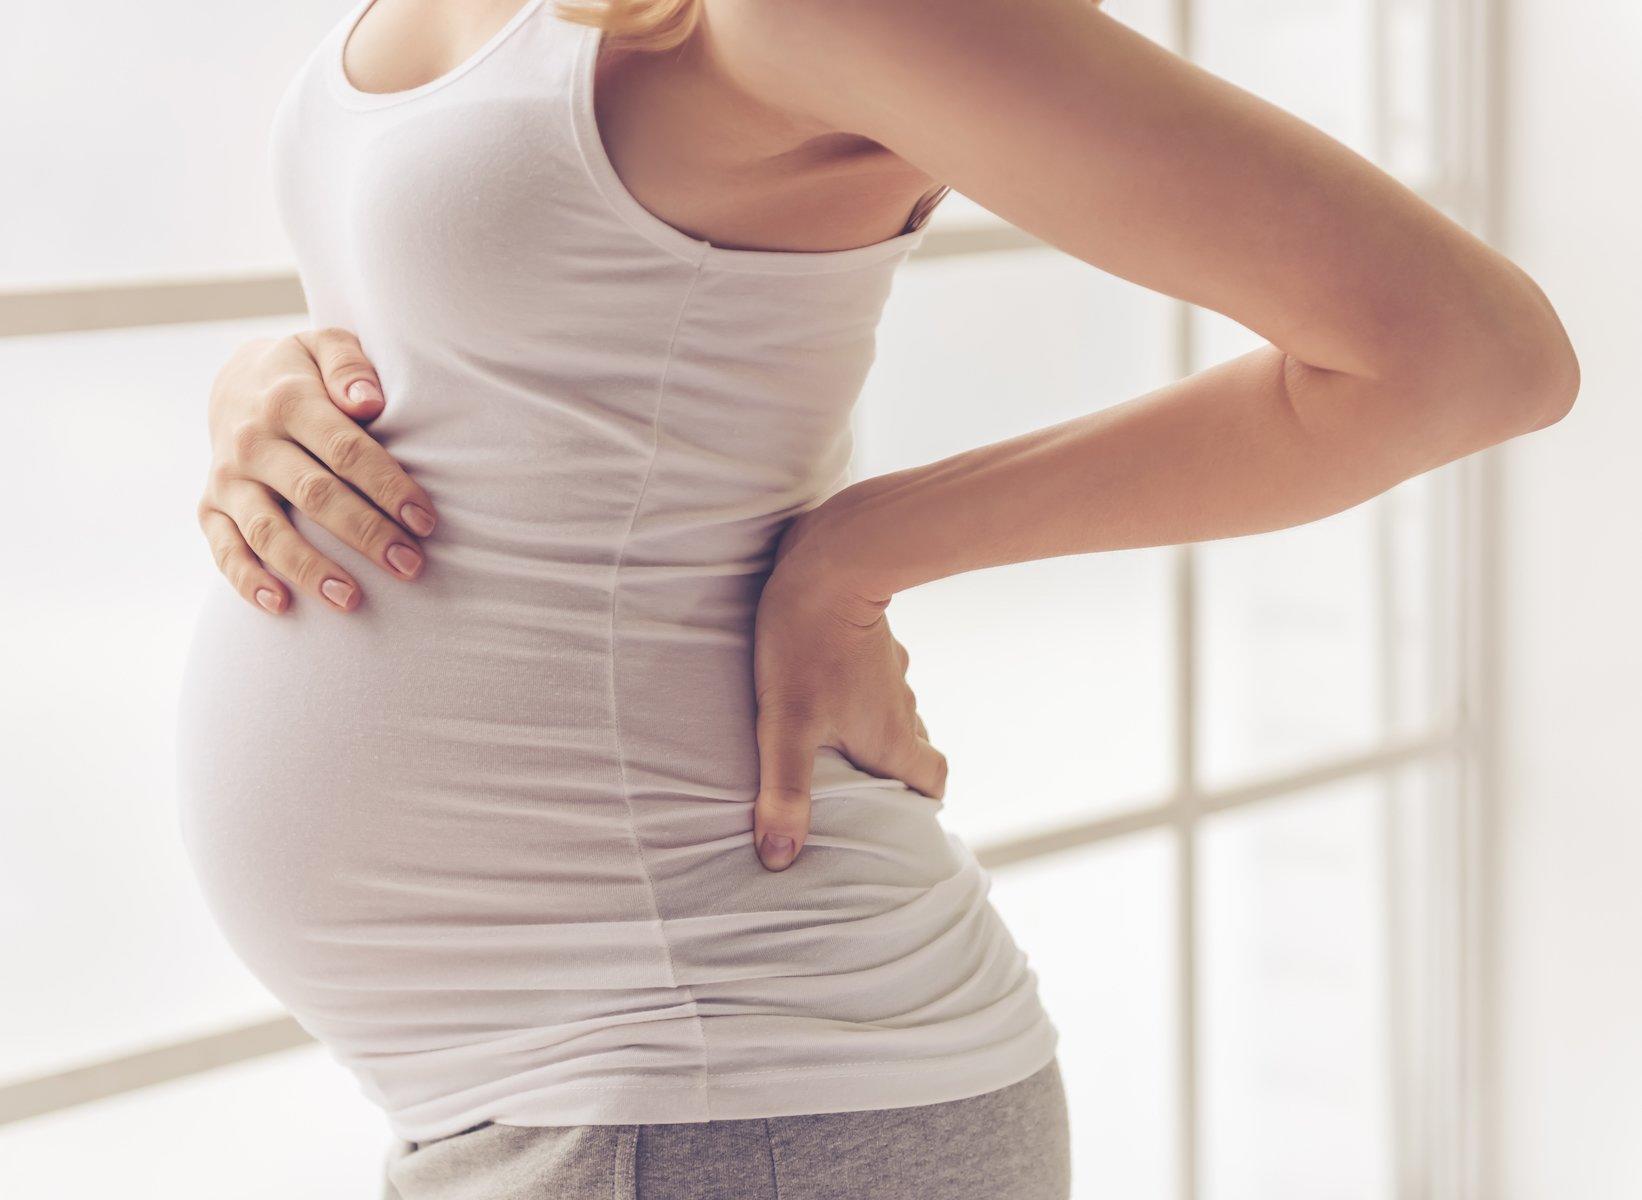 Dr Oen Blog: Can You Lose Weight While Pregnant